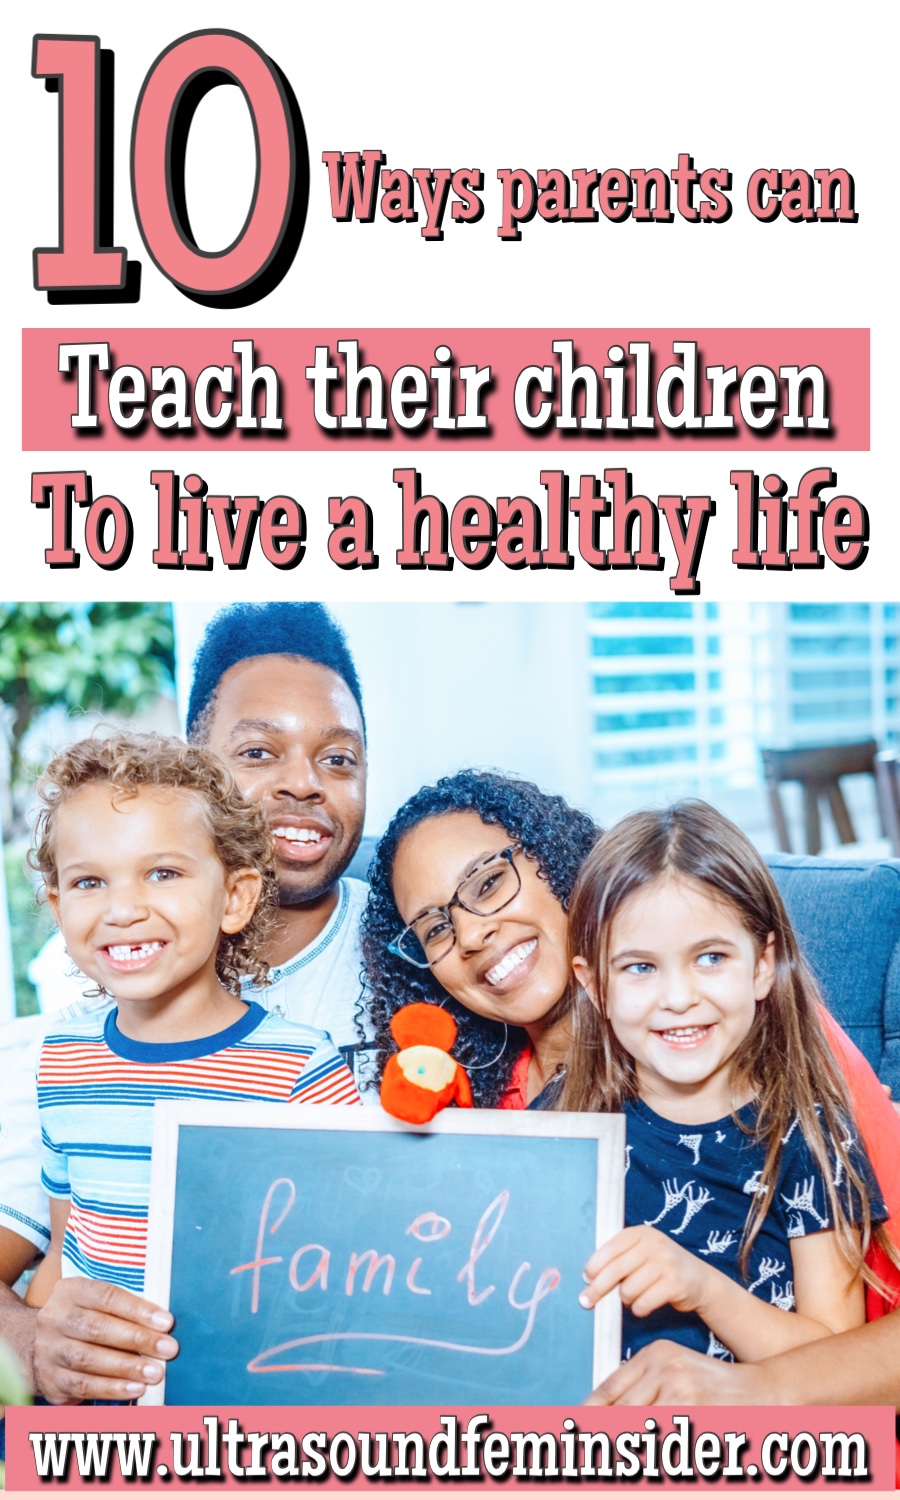 Parents Can Teach Their Children To Live a Healthy Life.